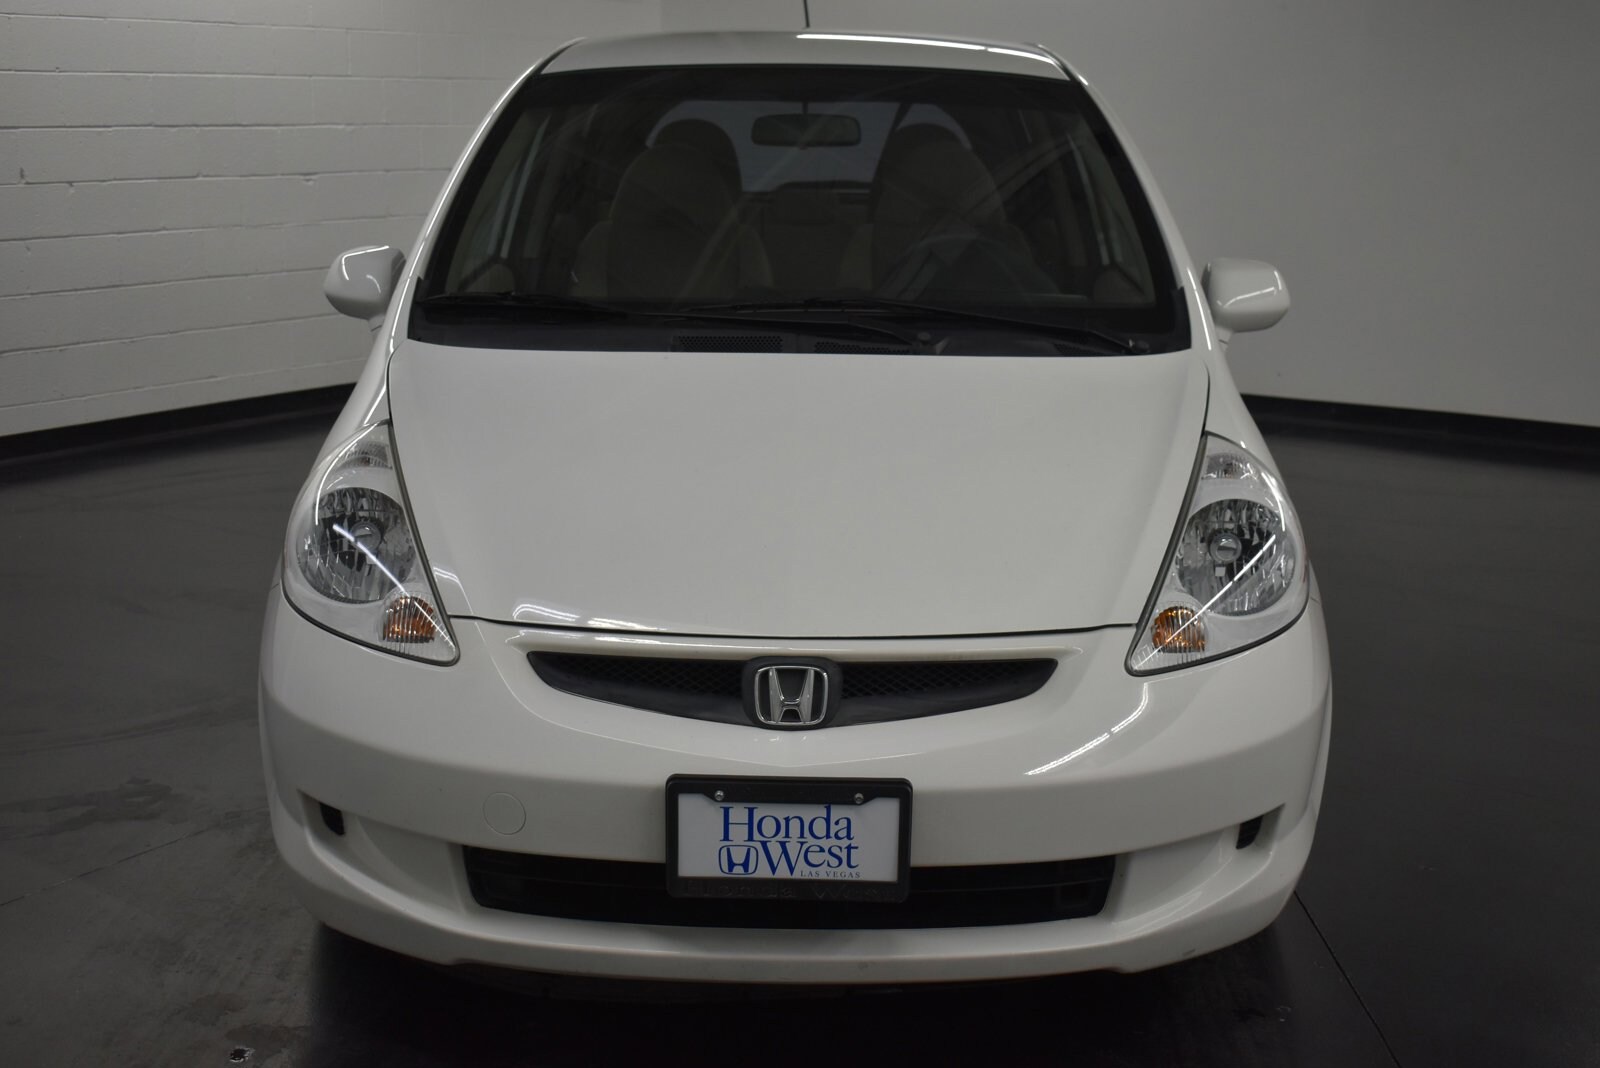 Used 2007 Honda Fit  with VIN JHMGD38447S030370 for sale in Las Vegas, NV